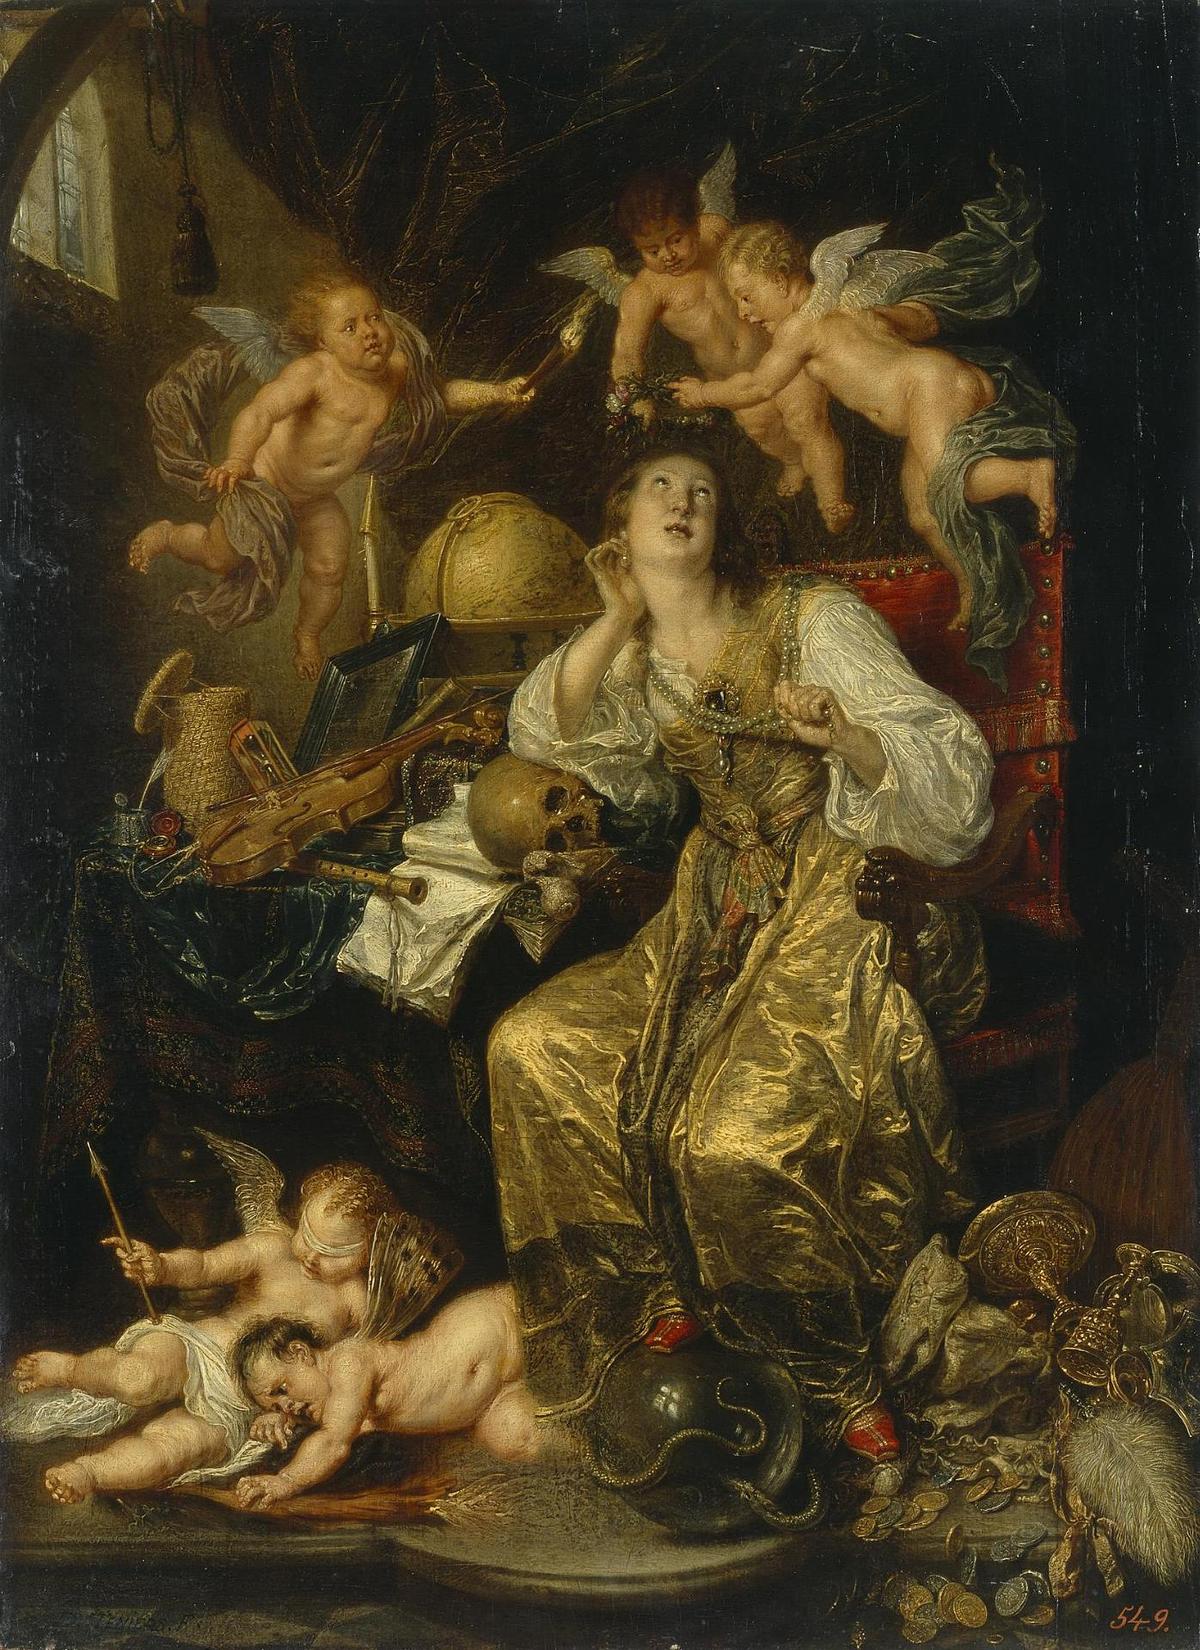 "Allegory of Prudence Triumphing Over Vanity (Allegory of Faith)," between 1651–1690, by David Teniers the Younger. Oil on panel. Hermitage Museum, Saint Petersburg. (Public Domain)